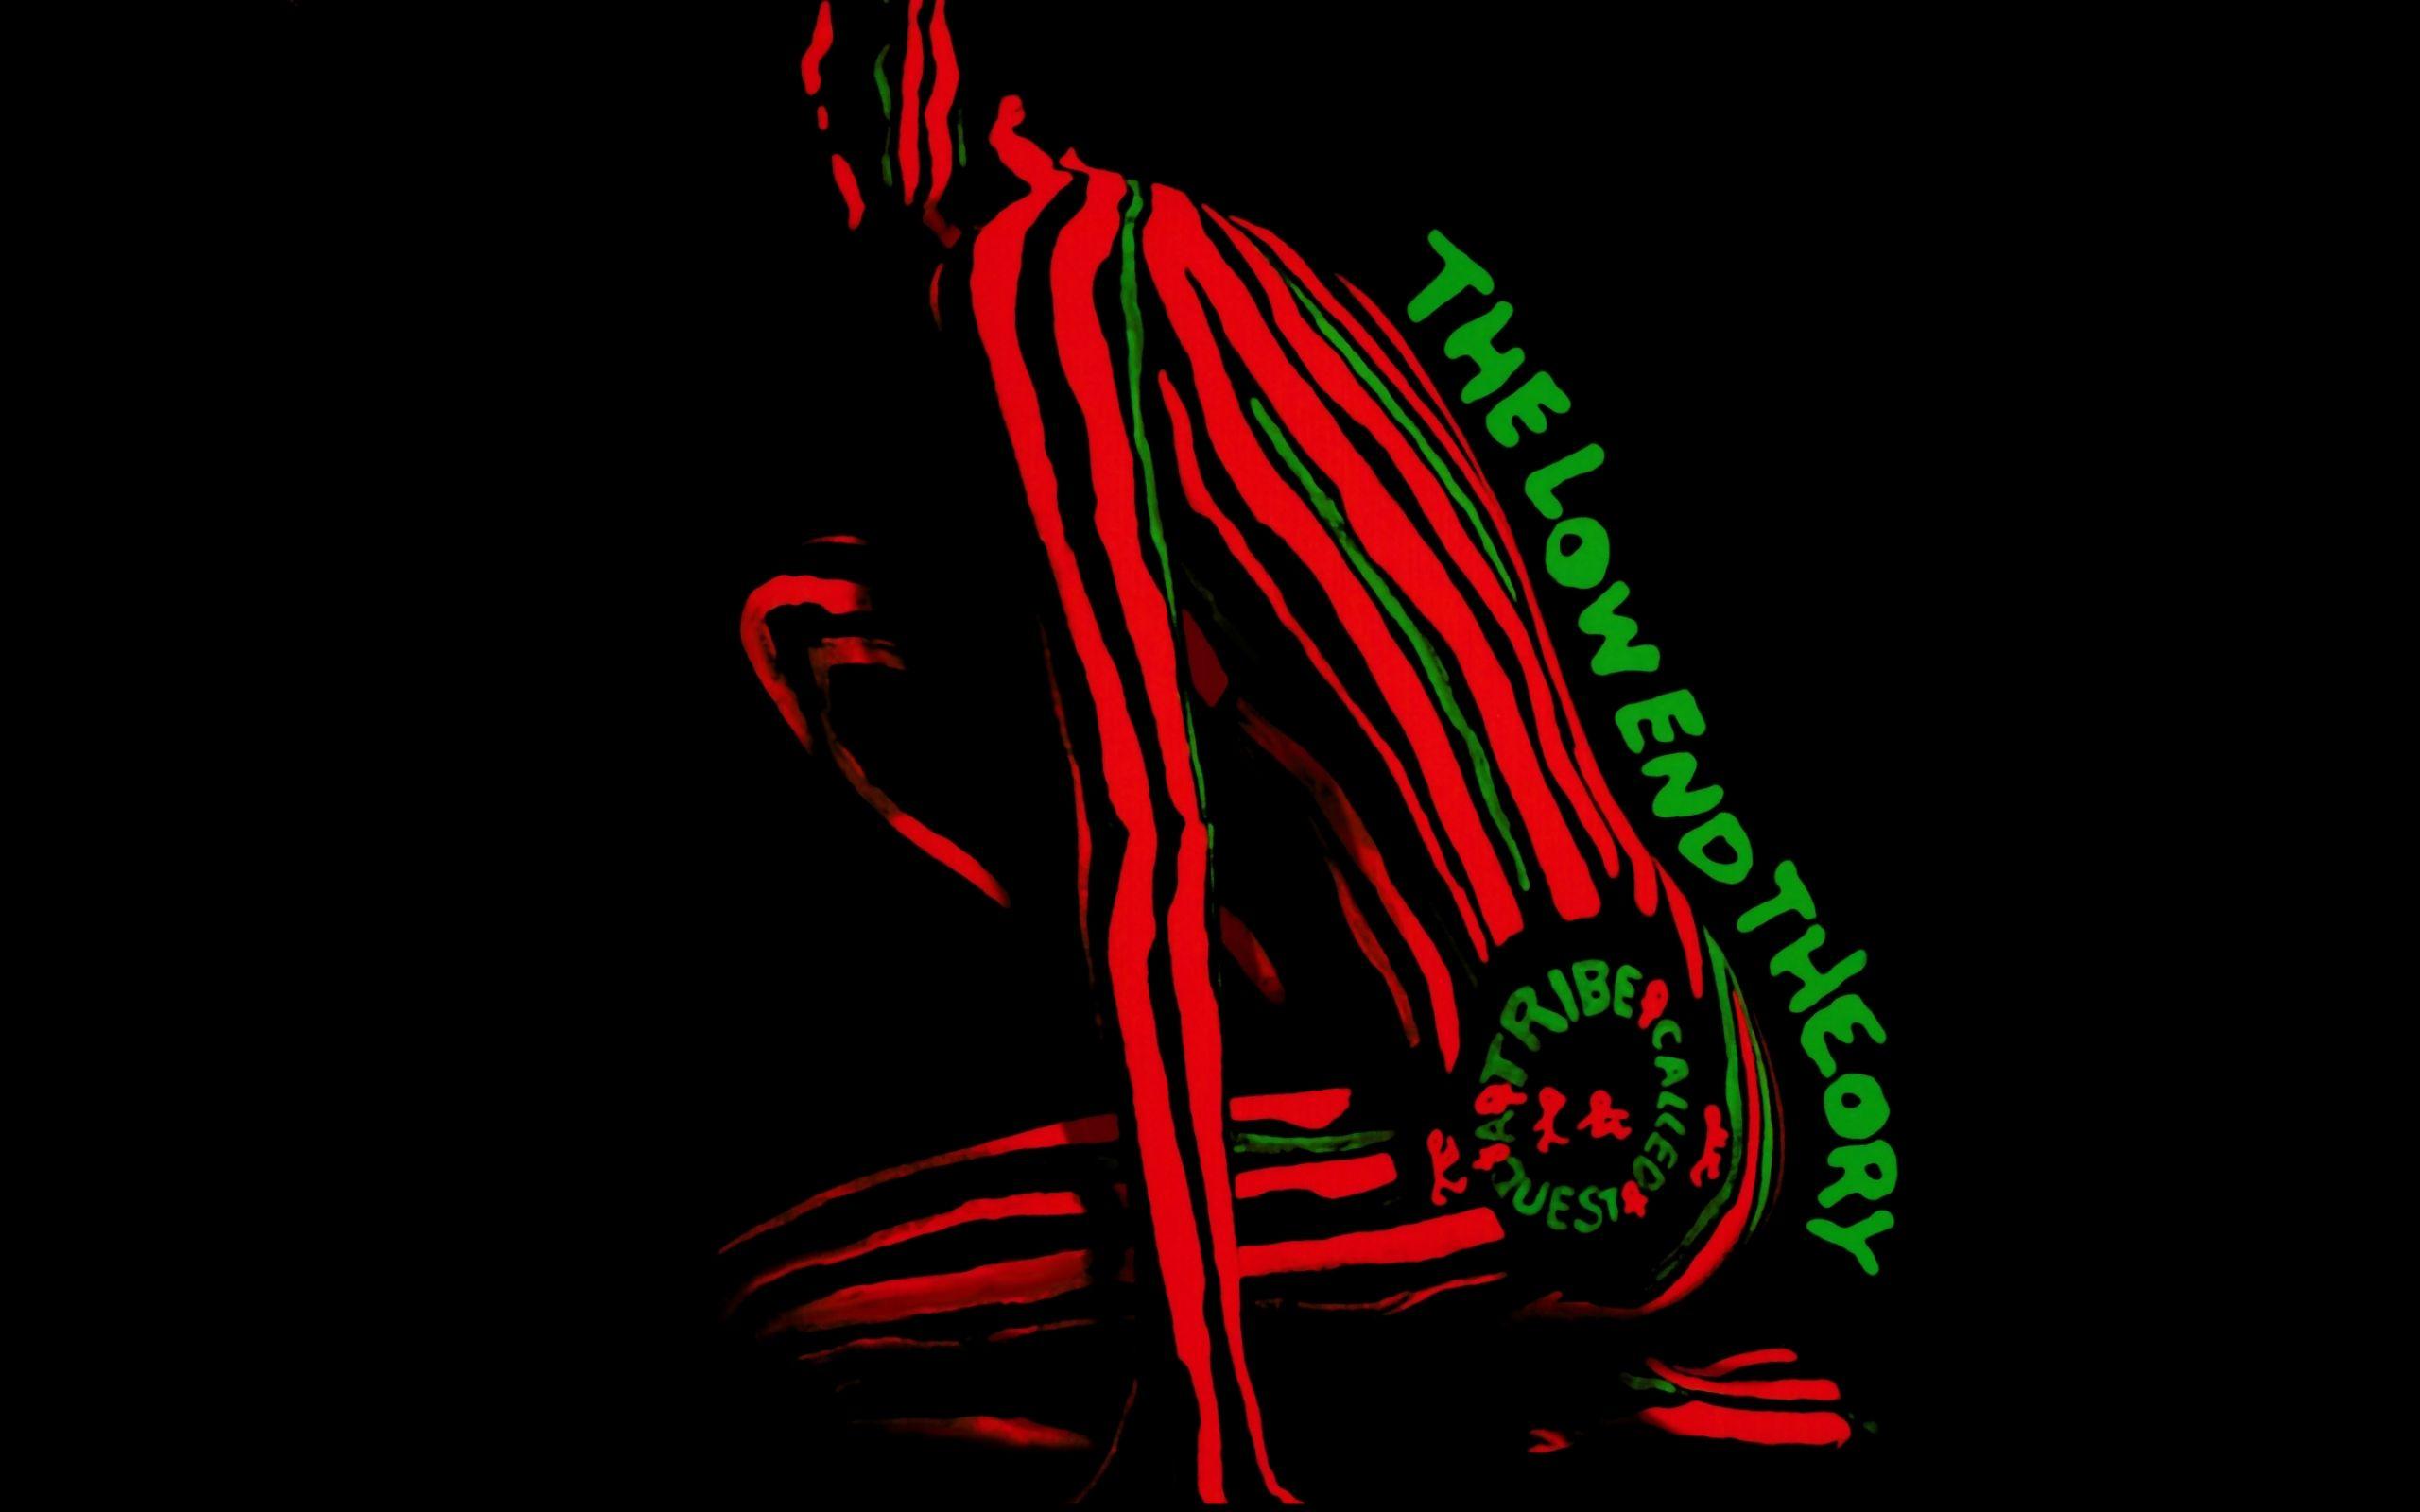 A Tribe Called Quest Wallpaper, A Tribe Called Quest Wallpaper